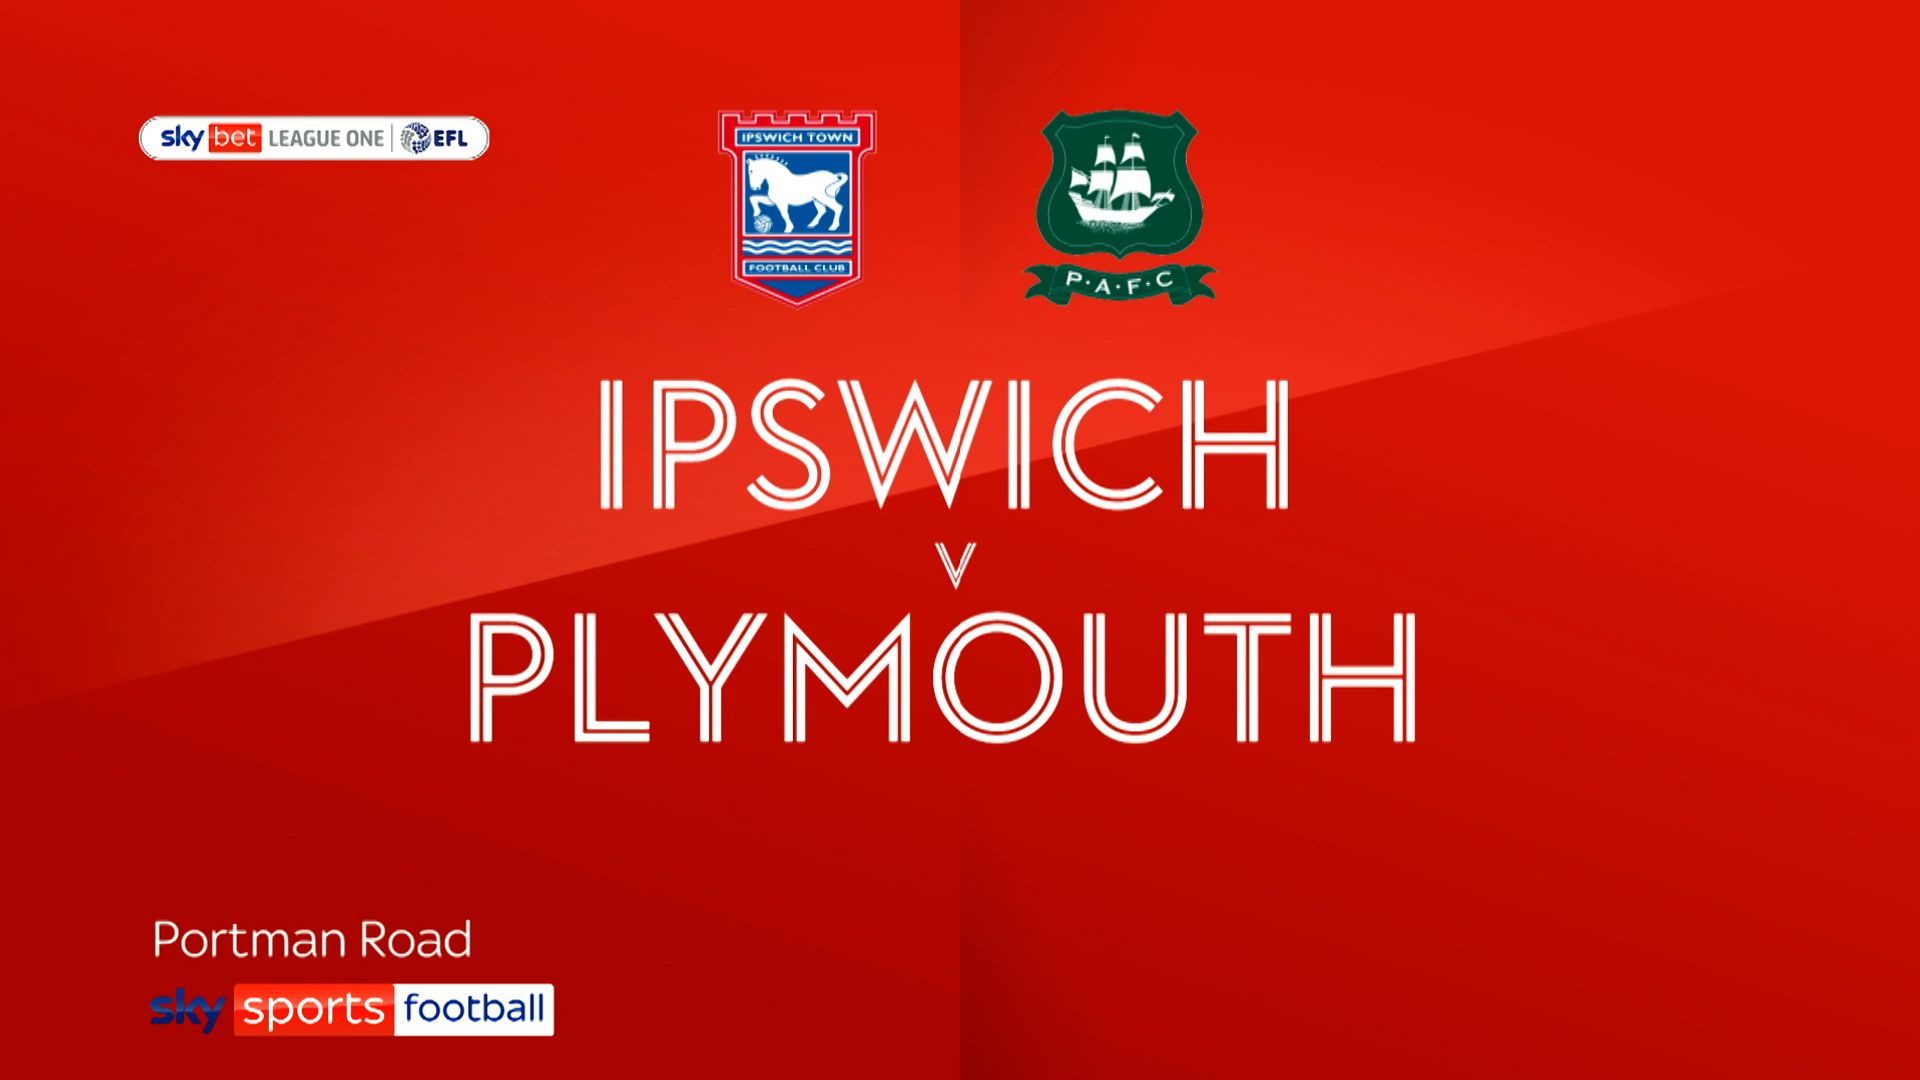 Mumba’s late goal boosts Plymouth as they hold Ipswich to a draw